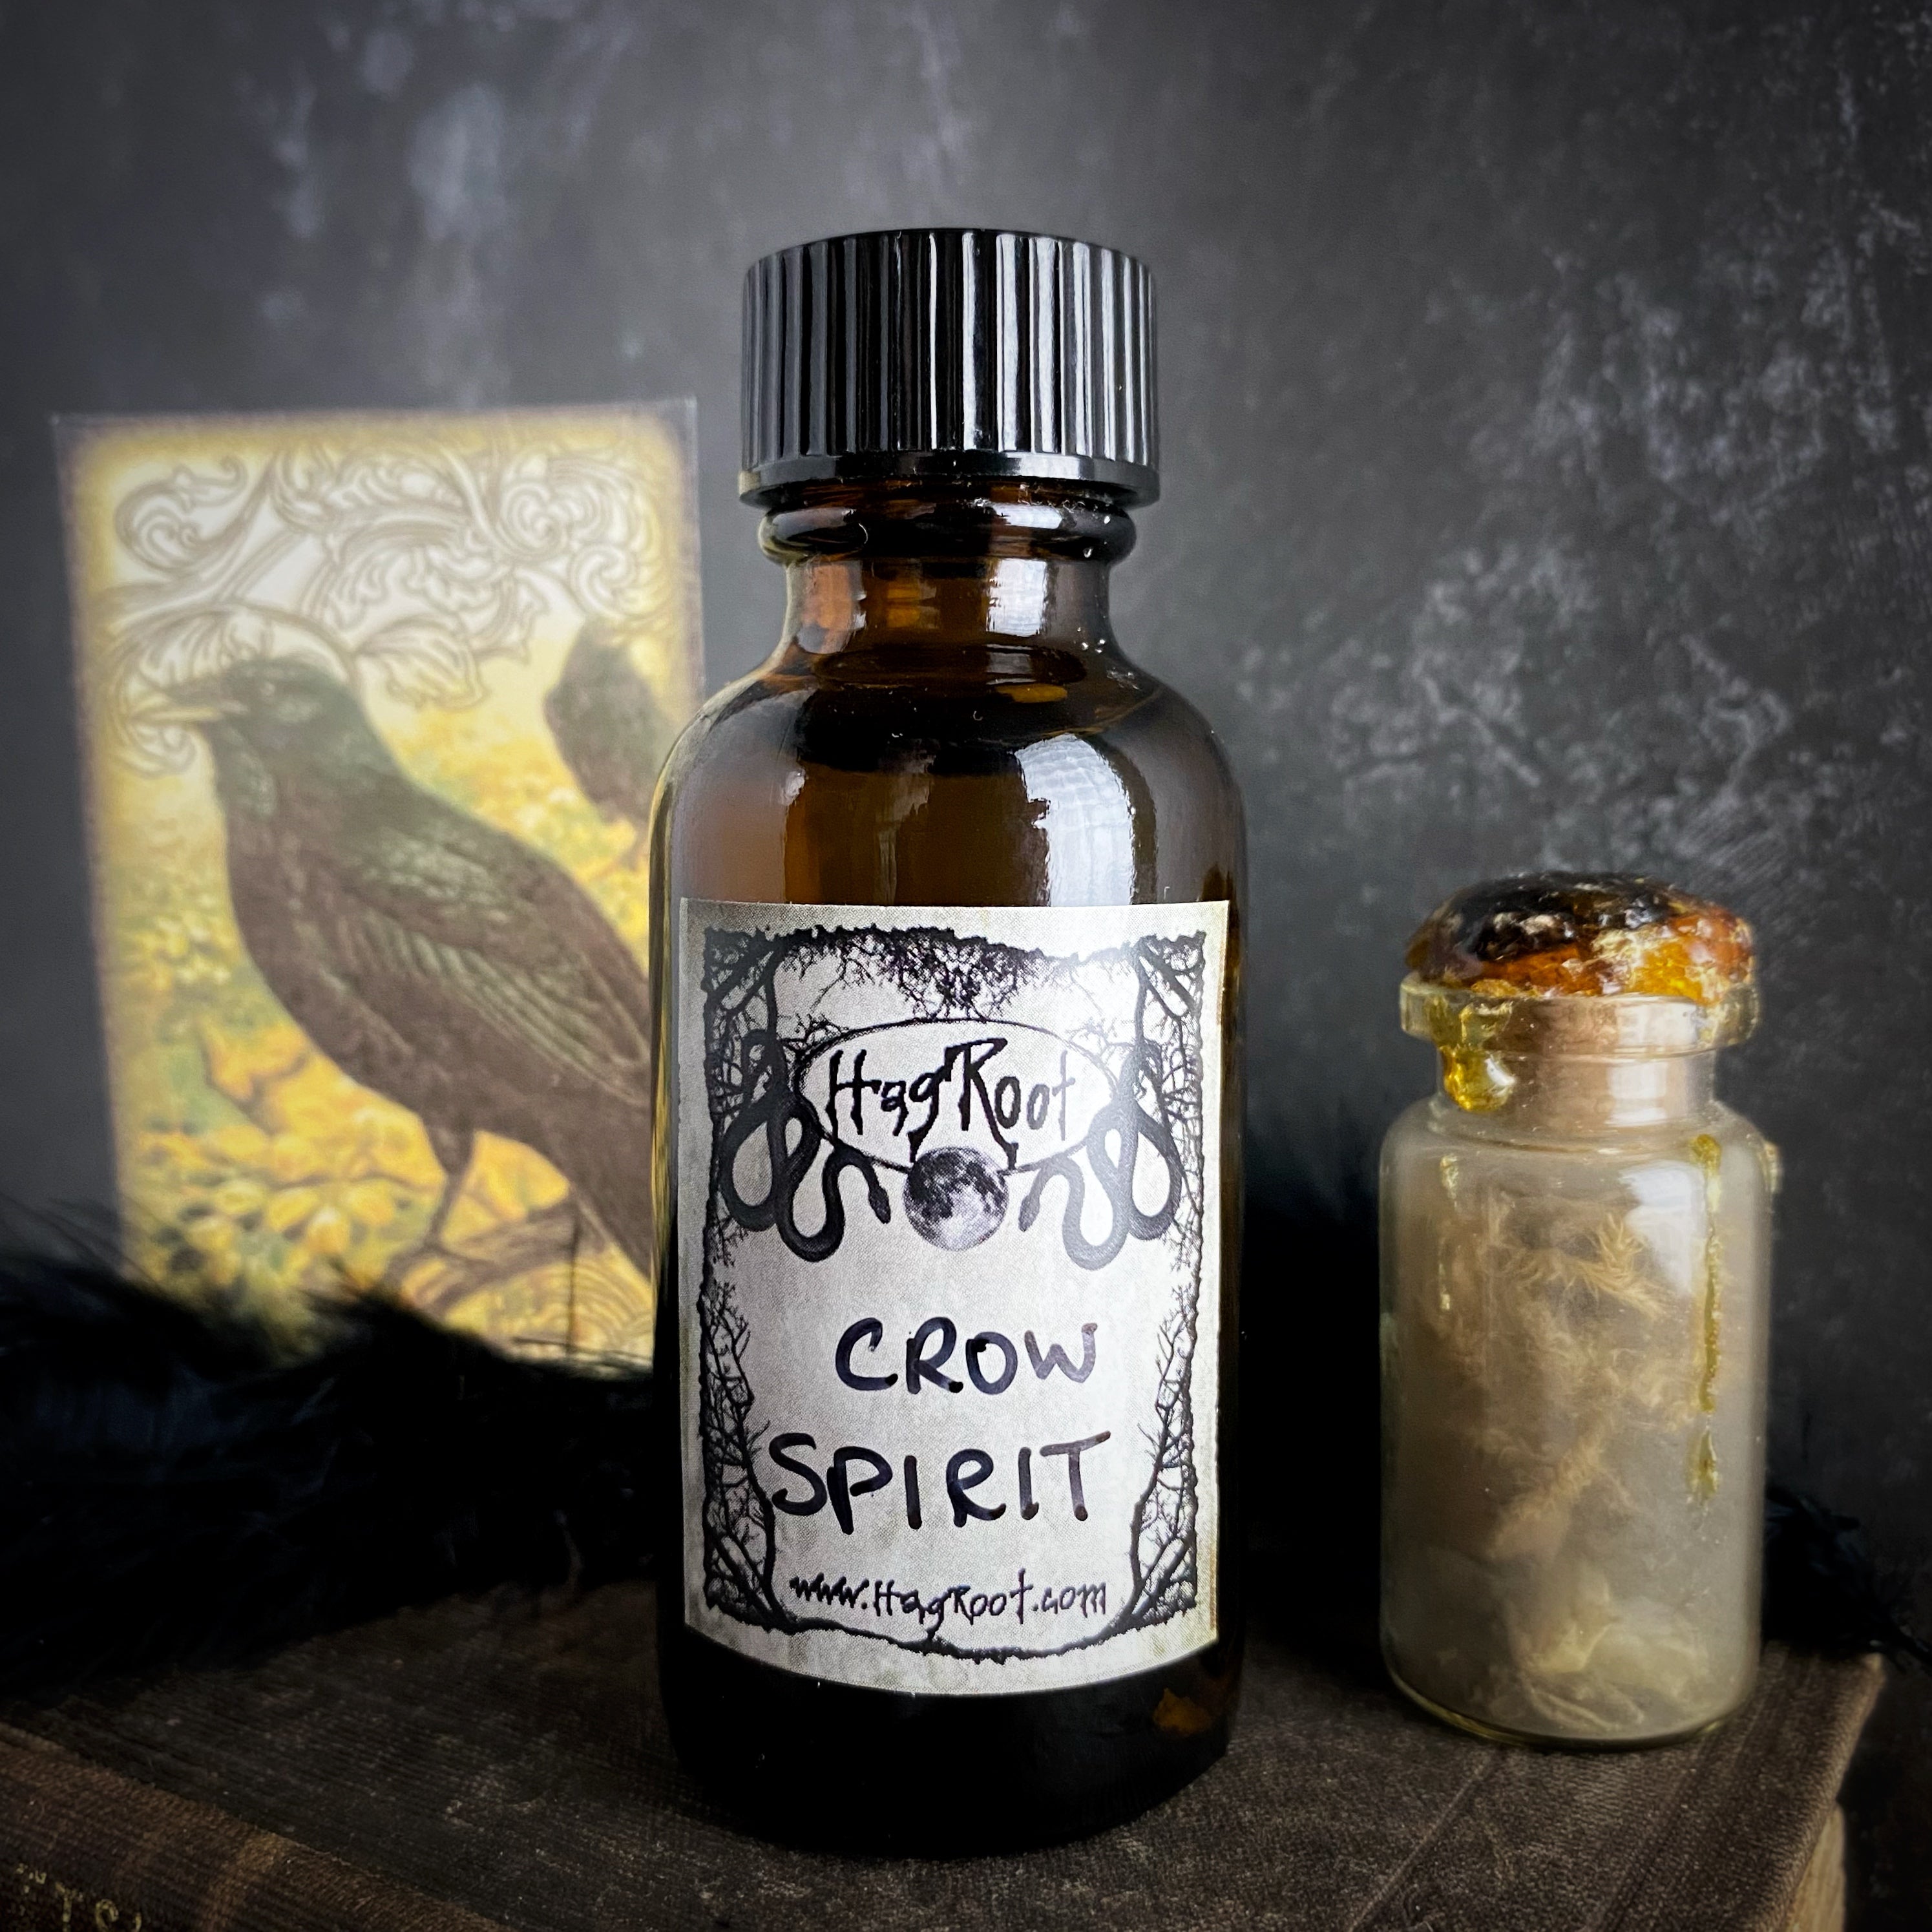 CROW SPIRIT-(Black Tea Leaves, Aged Leather, Black Pine, Charred Wood, Honey, Autumn Spices)-Perfume, Cologne, Anointing, Ritual Oil